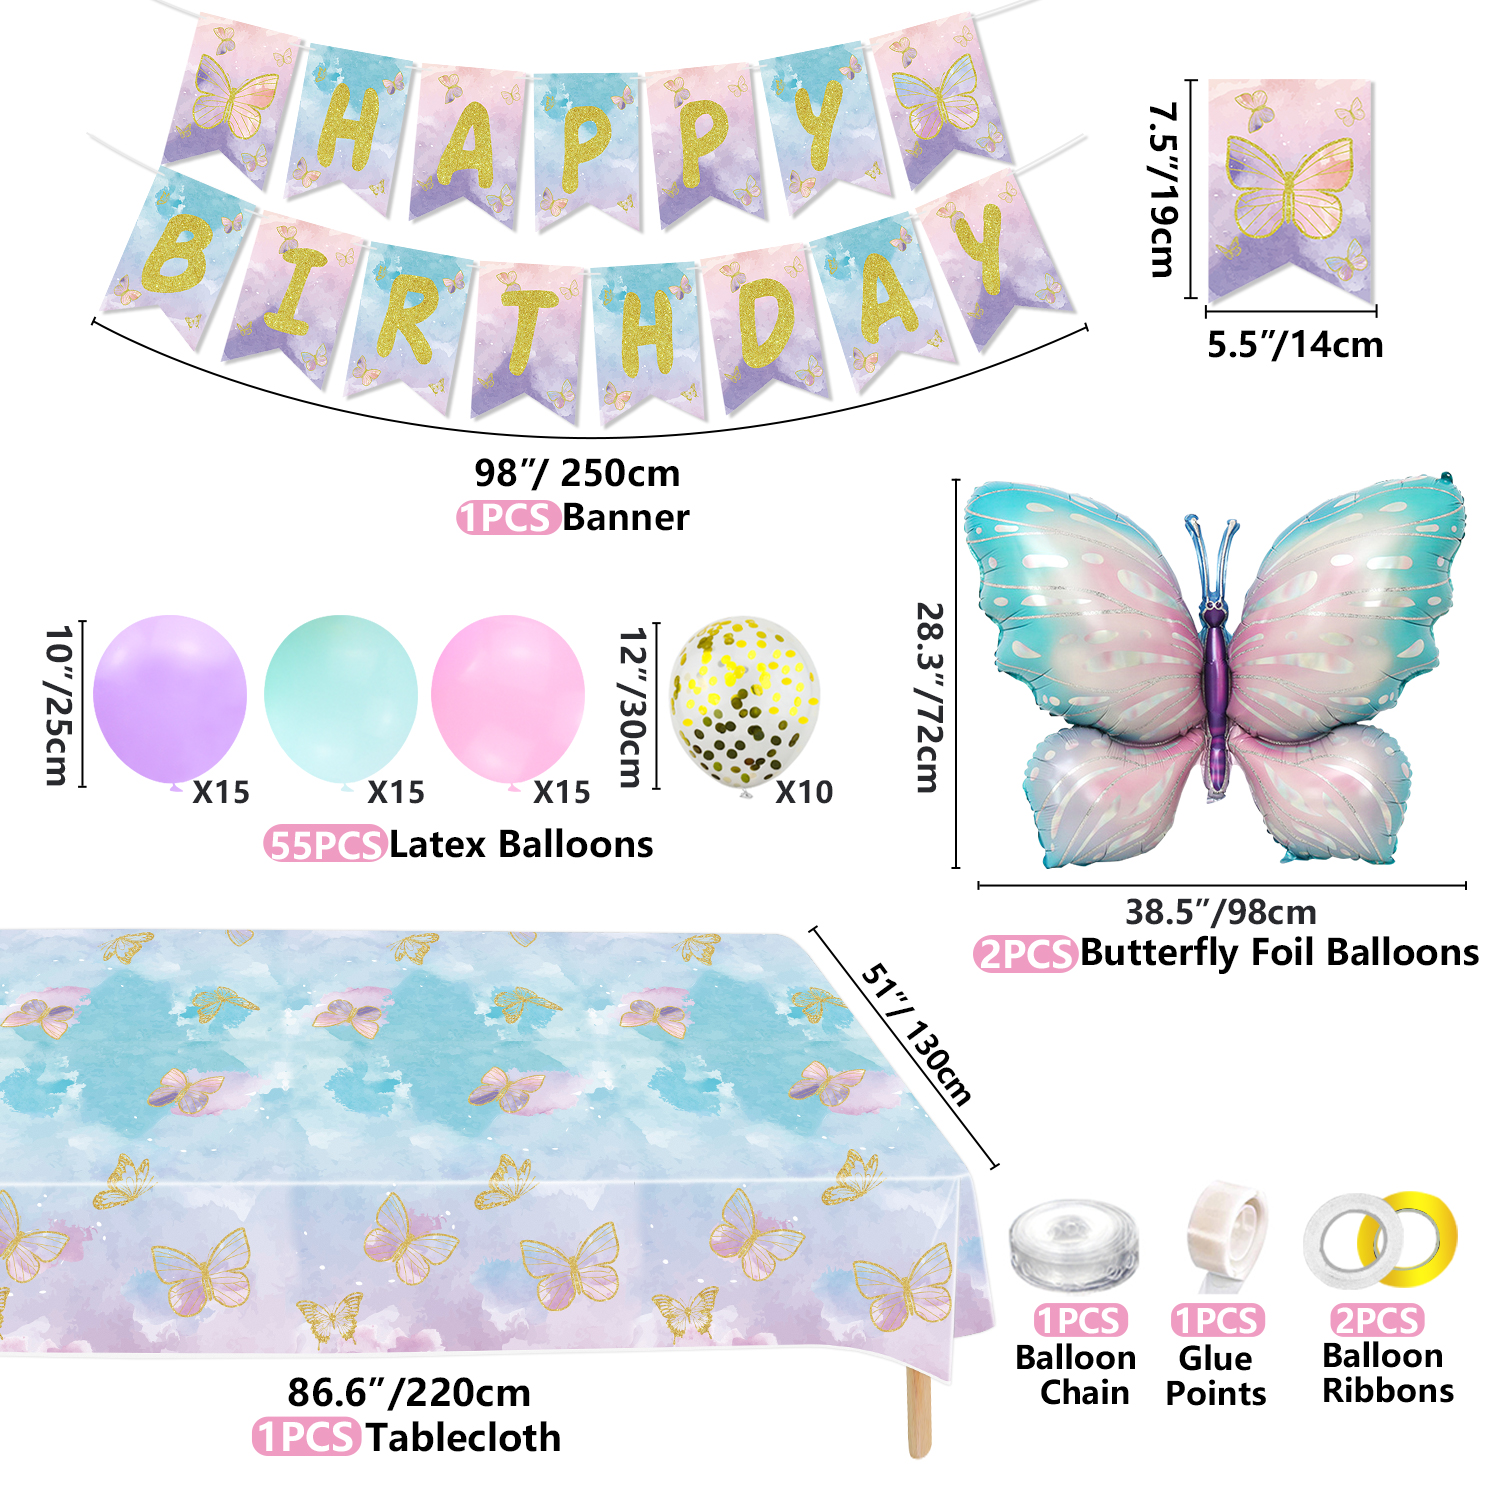 256 Pcs Butterfly Party Decorations - Including Plates, Tablecloth, Balloons, Banner, Butterfly Stickers, Cups, Butterfly Wing Set for Butterfly Birthday Decorations, Fairy Party Supplies - image 3 of 7